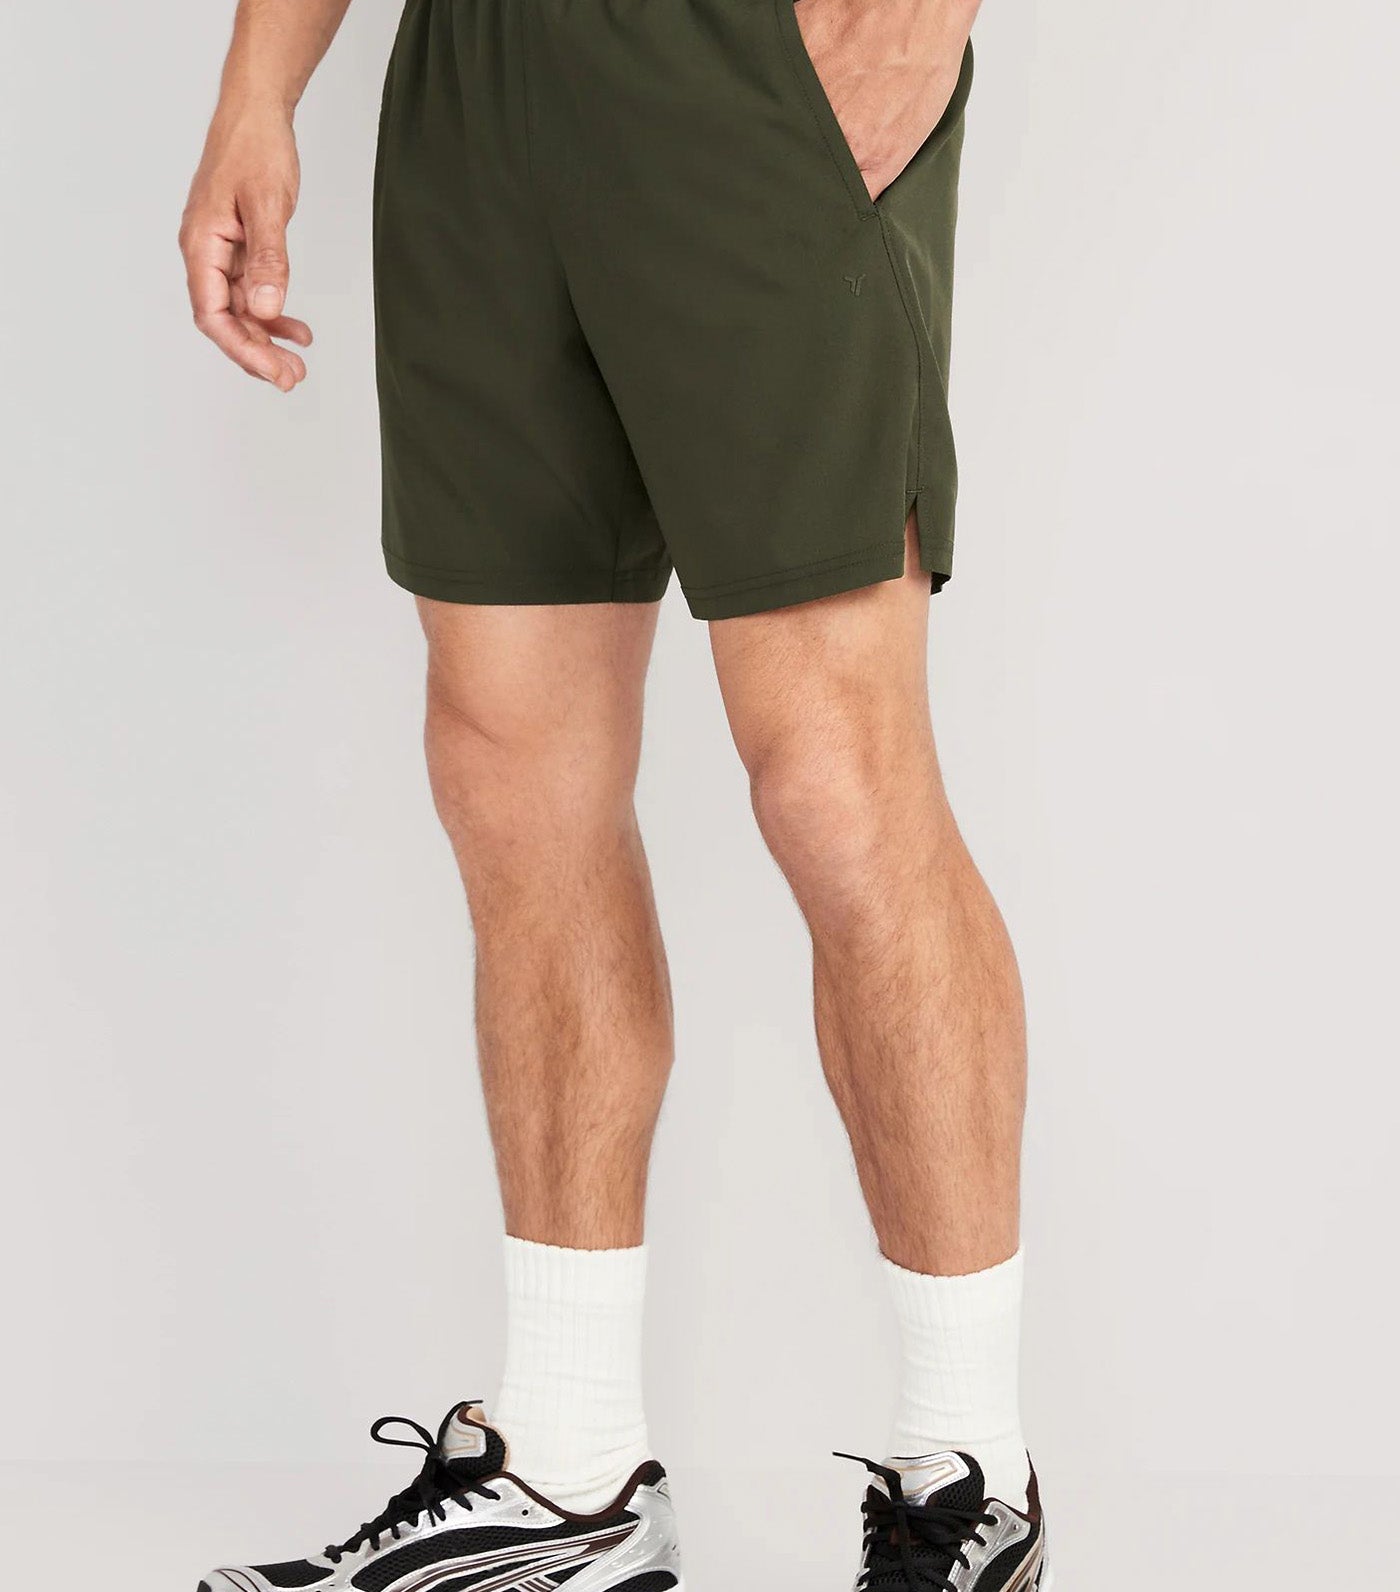 Essential Woven Workout Shorts for Men - 7-inch inseam Heritage Green